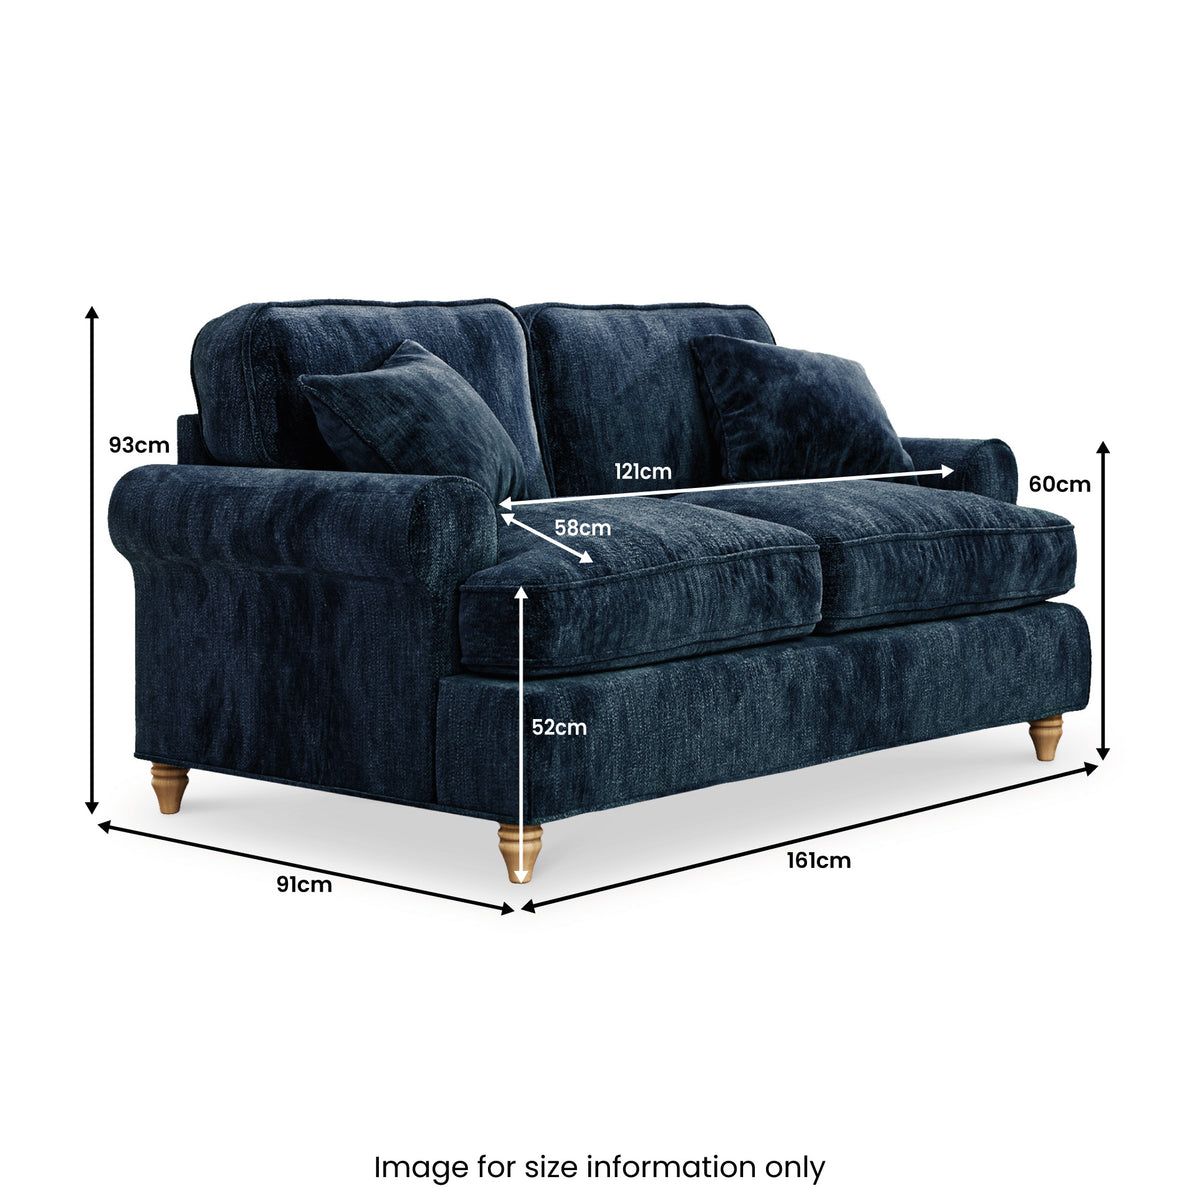 Alfie Navy Blue 2 Seater Sofa from Roseland Furniture